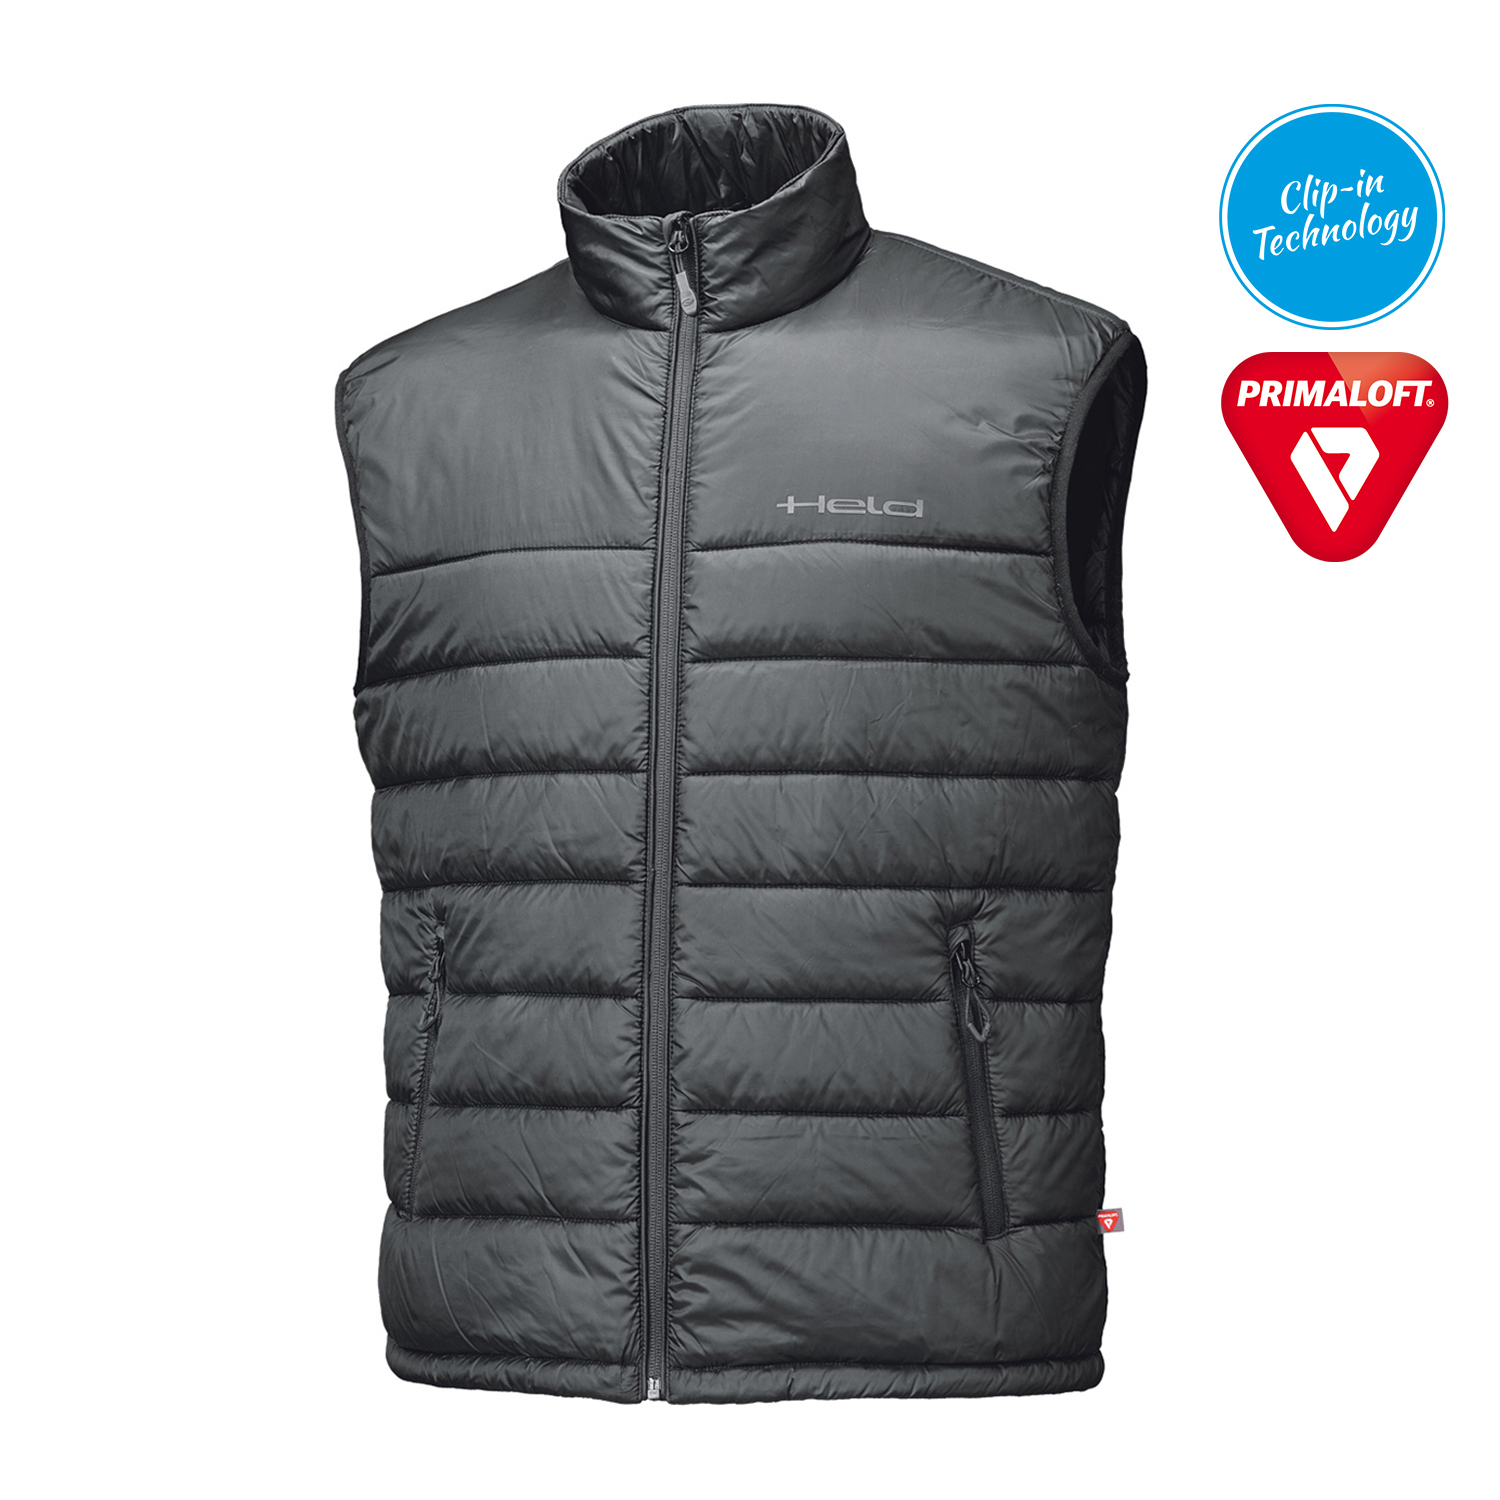 Held Prime Vest - Available in Various Sizes